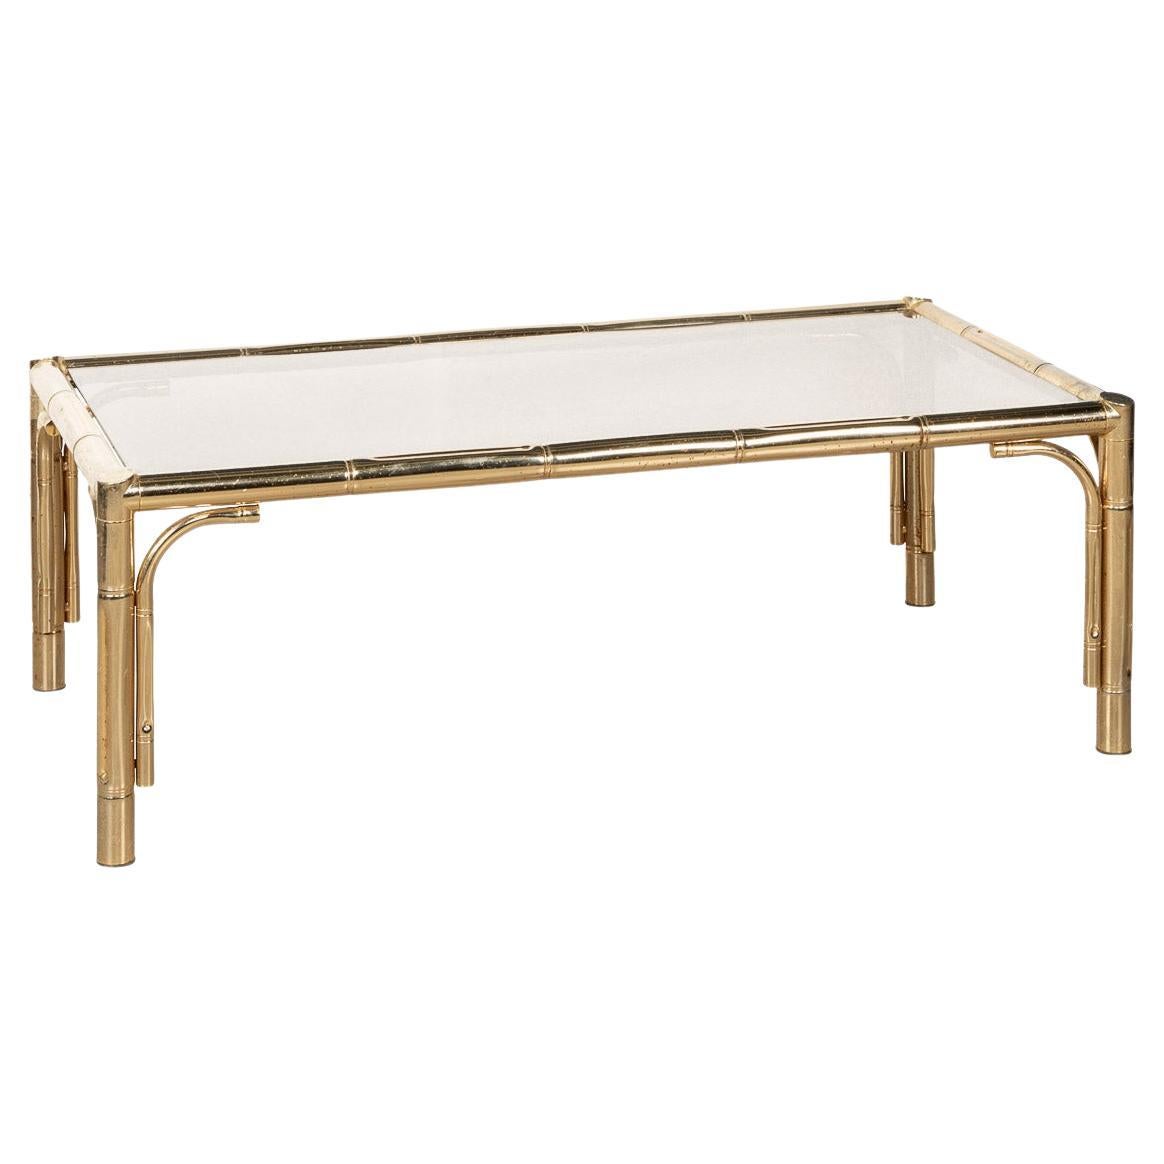 20th Century France Brass Coffee Table Attributable To Maison Jansen, c.1970 For Sale